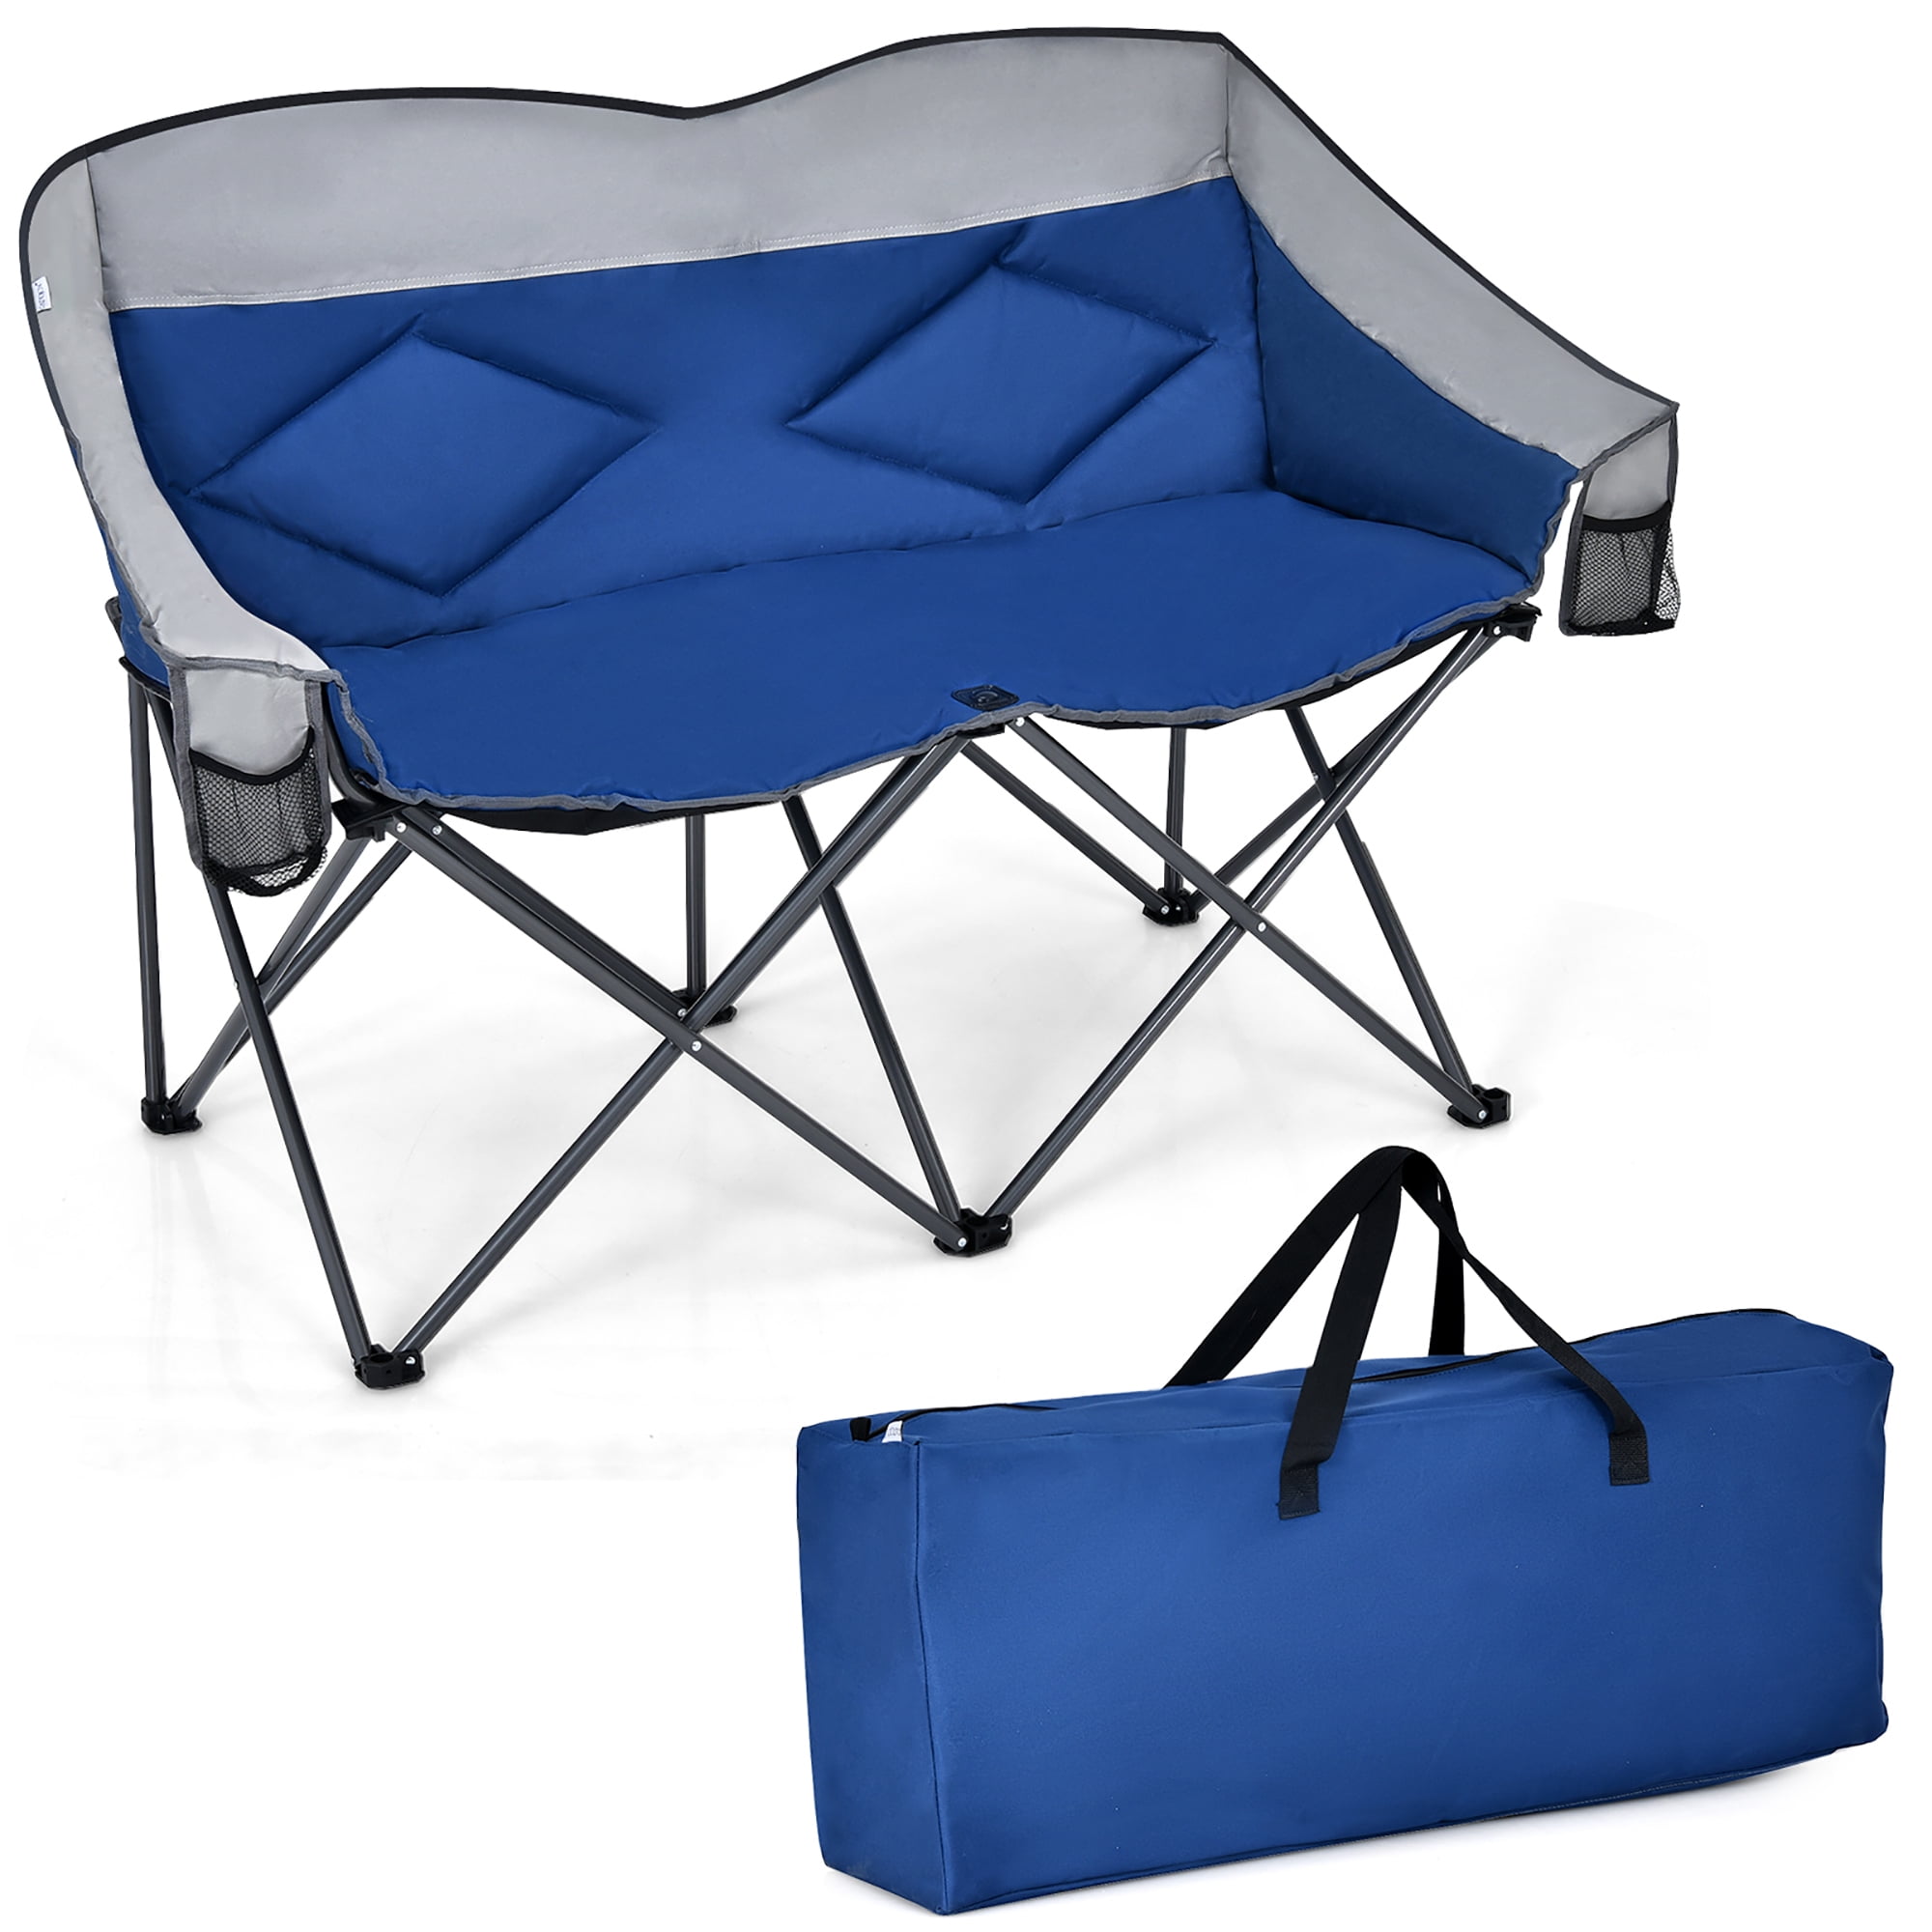 Basketball Mom Black Folding Camping Chair with Carry Bag 